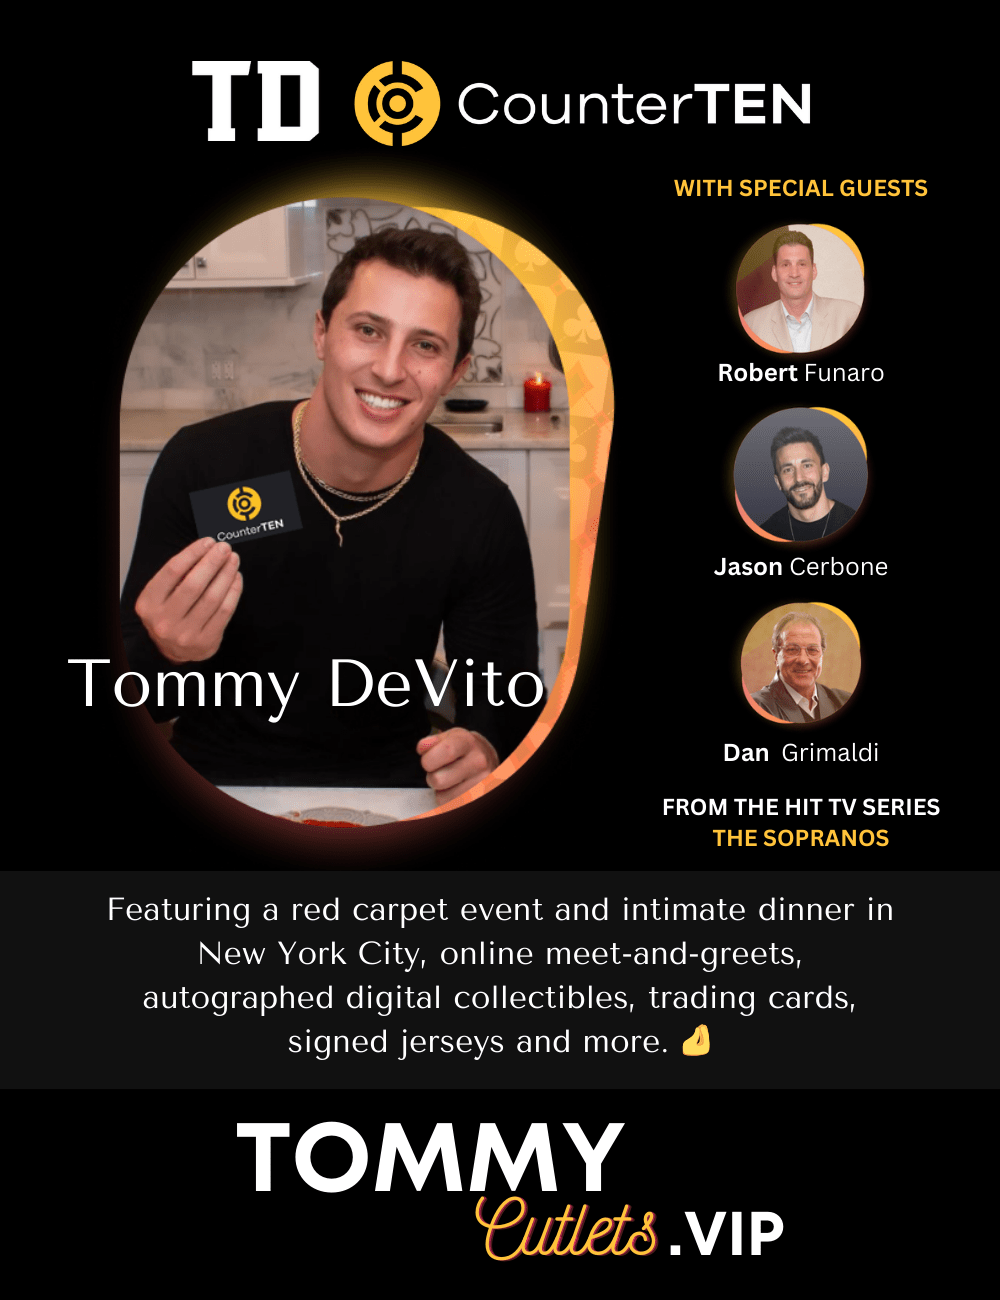 Tommy DeVito promotion tommycutlets.vip